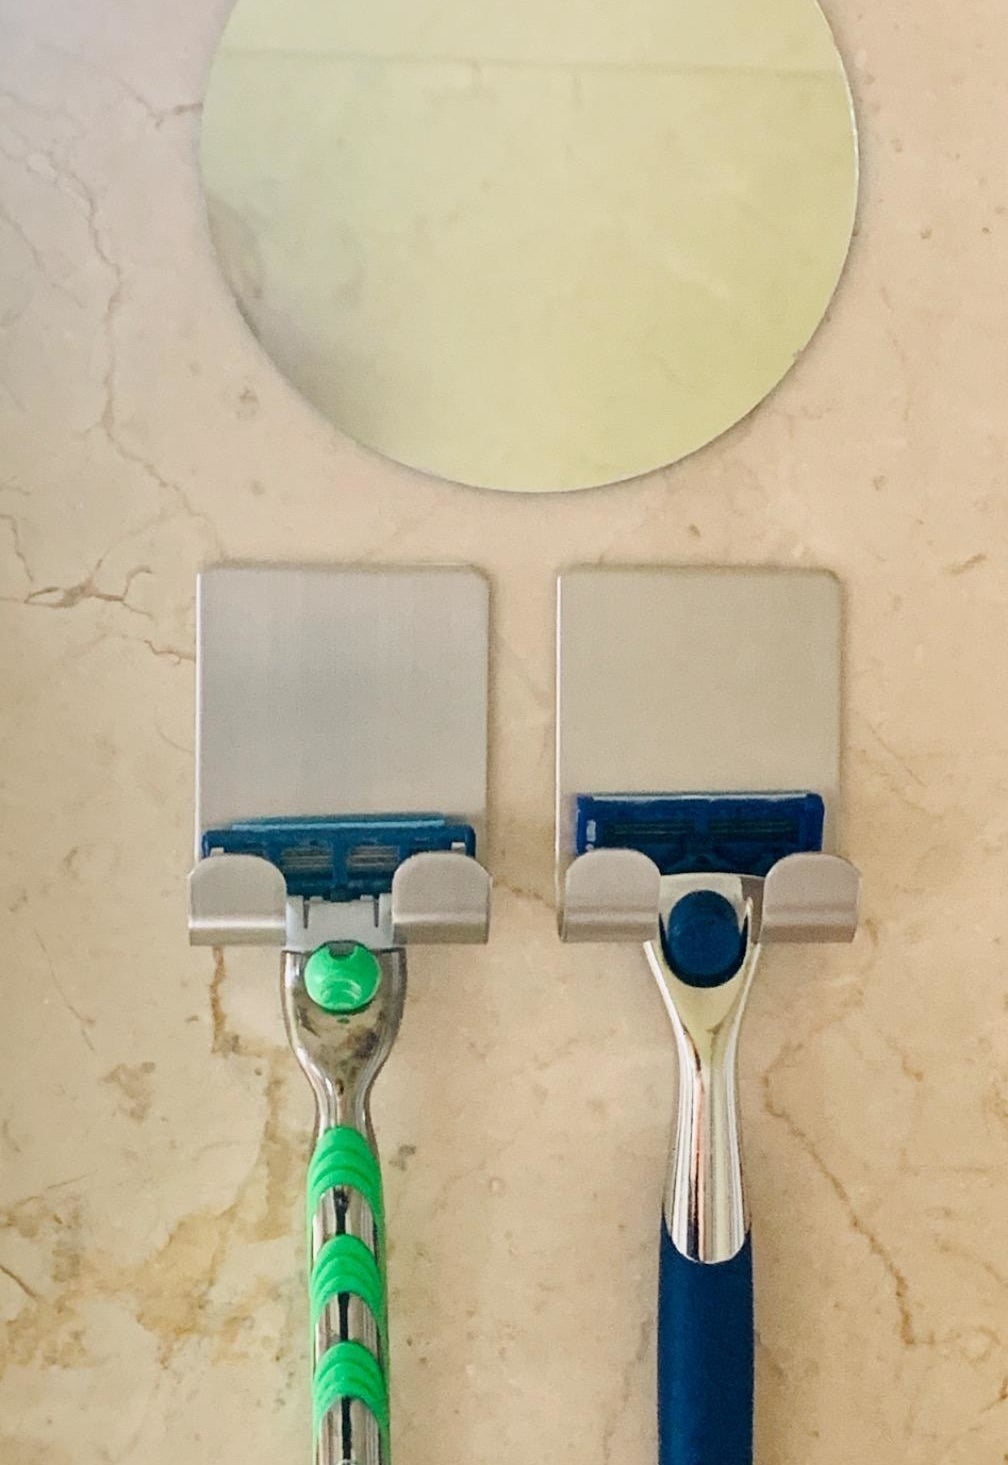 Two razors hanging next to each other on self-adhesive razor holders 